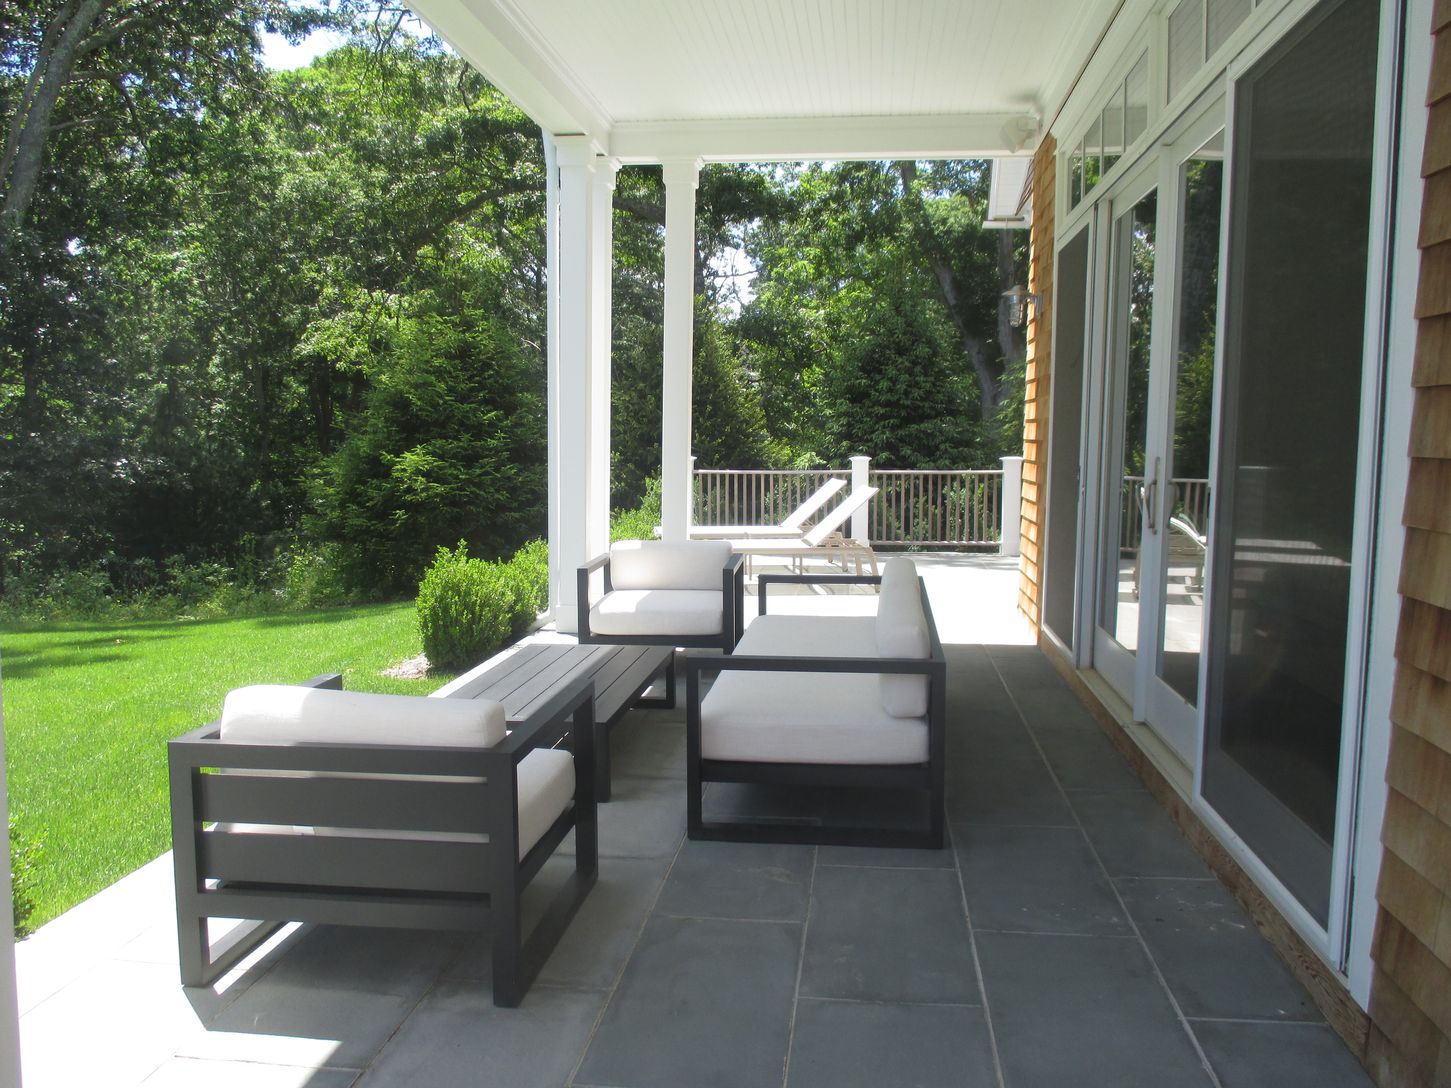  Outdoor Seating Area